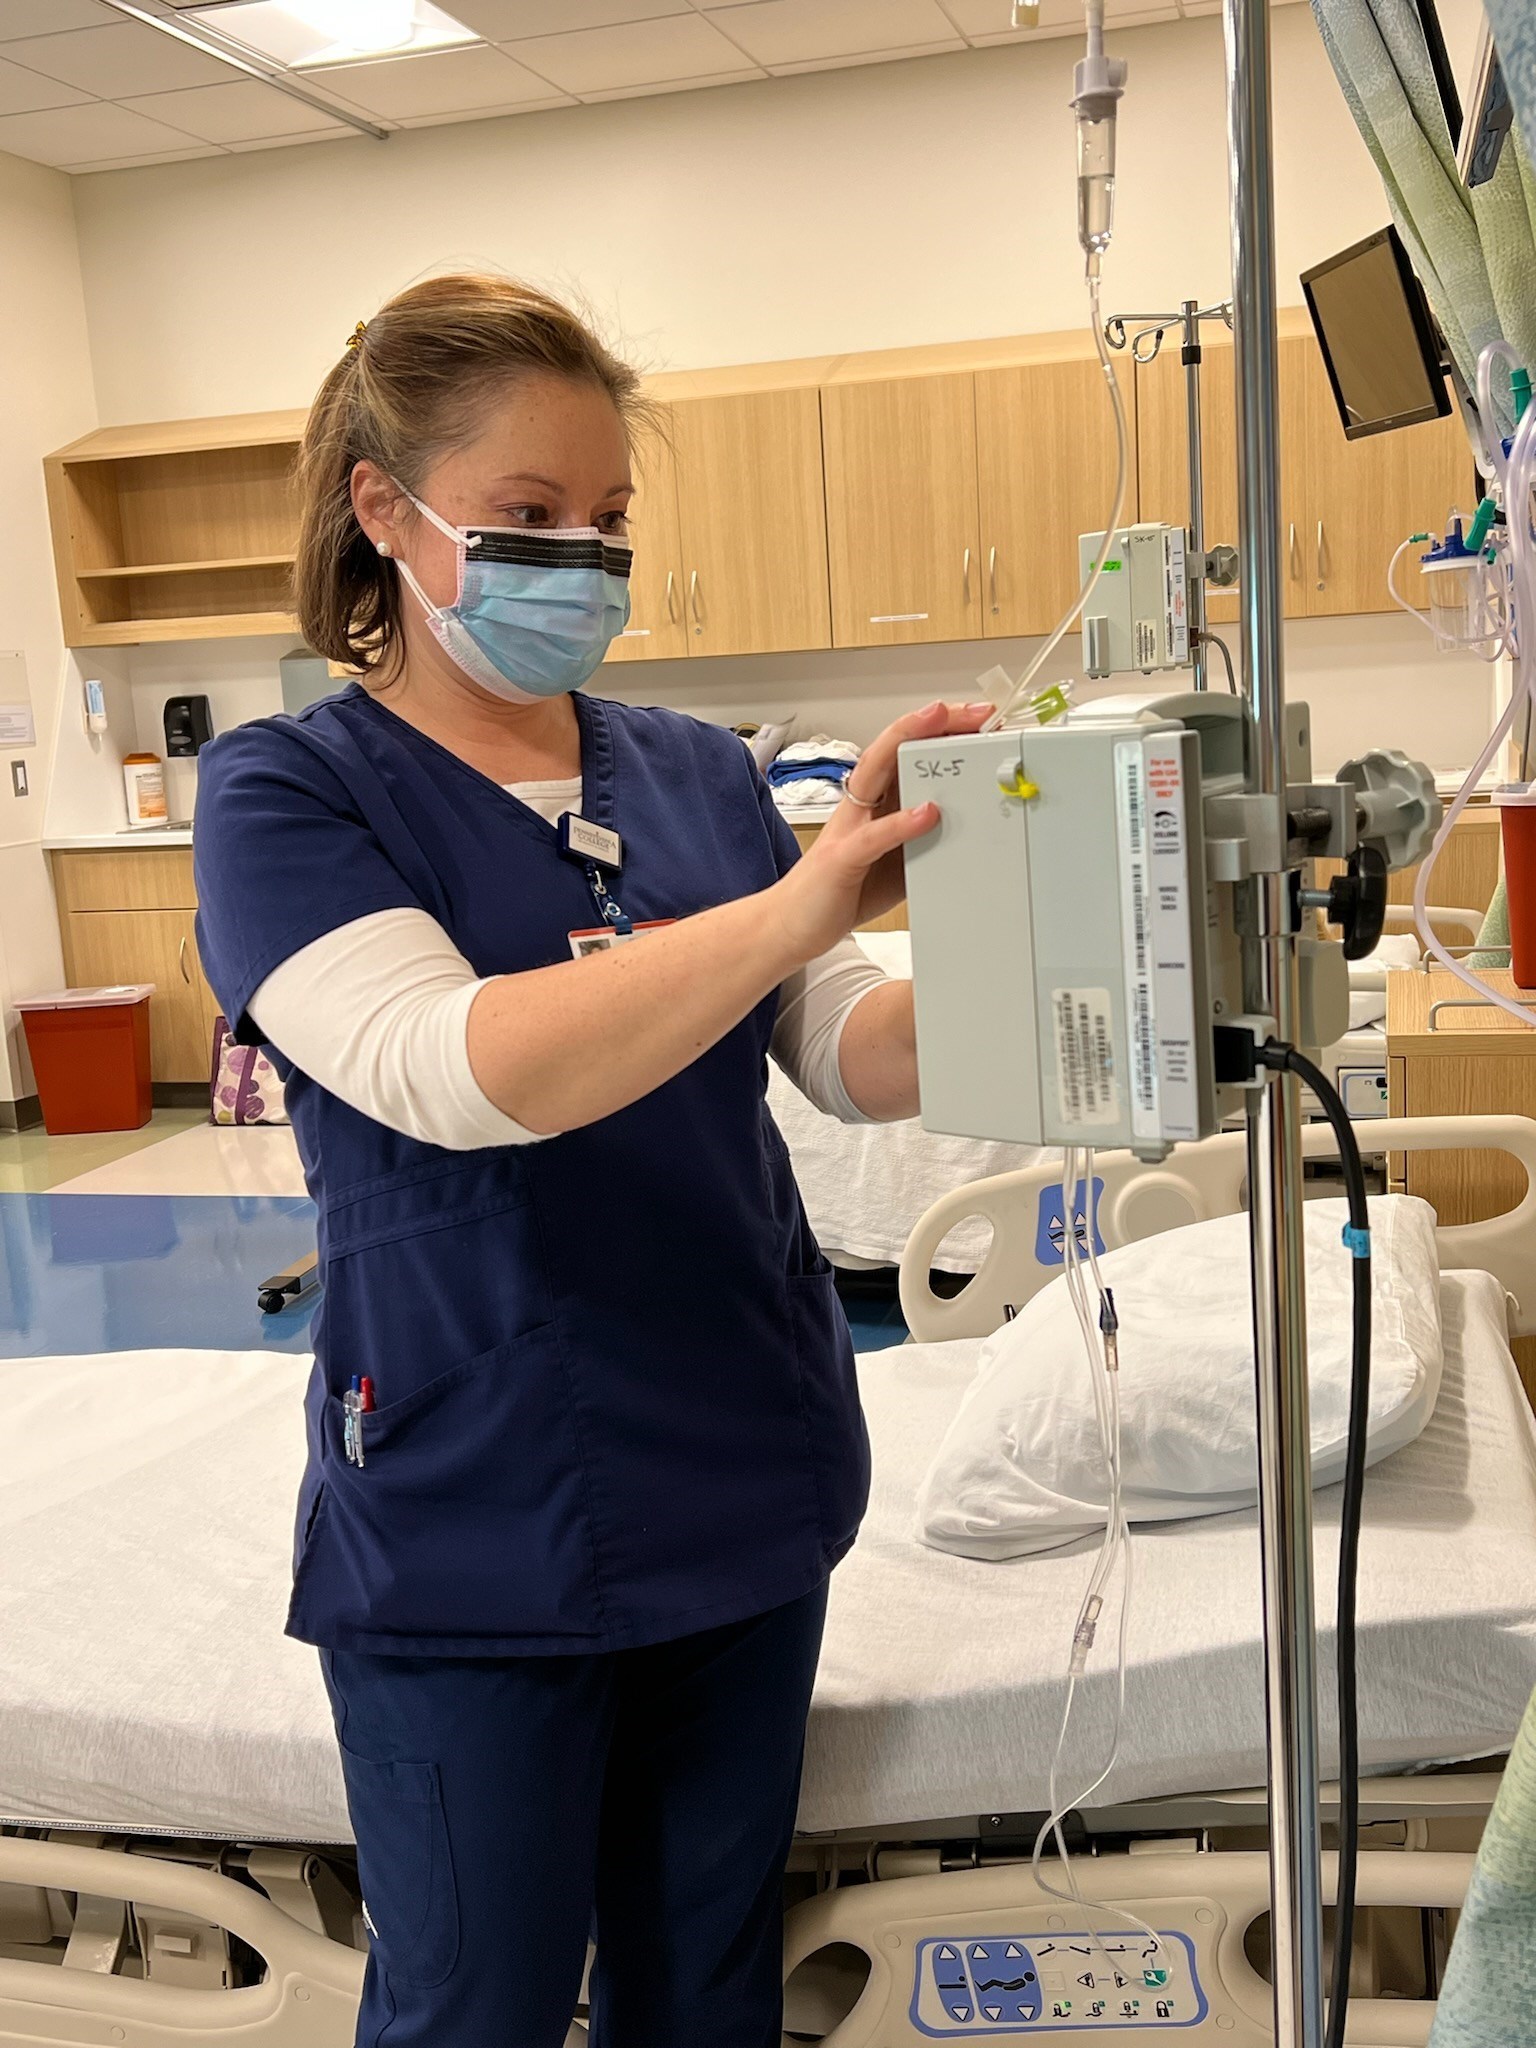 Ruth Brainerd has enjoyed the flexibility offered through WellStaffed™, an innovative nurse float pool program that supports staffing needs at WellSpan entities.